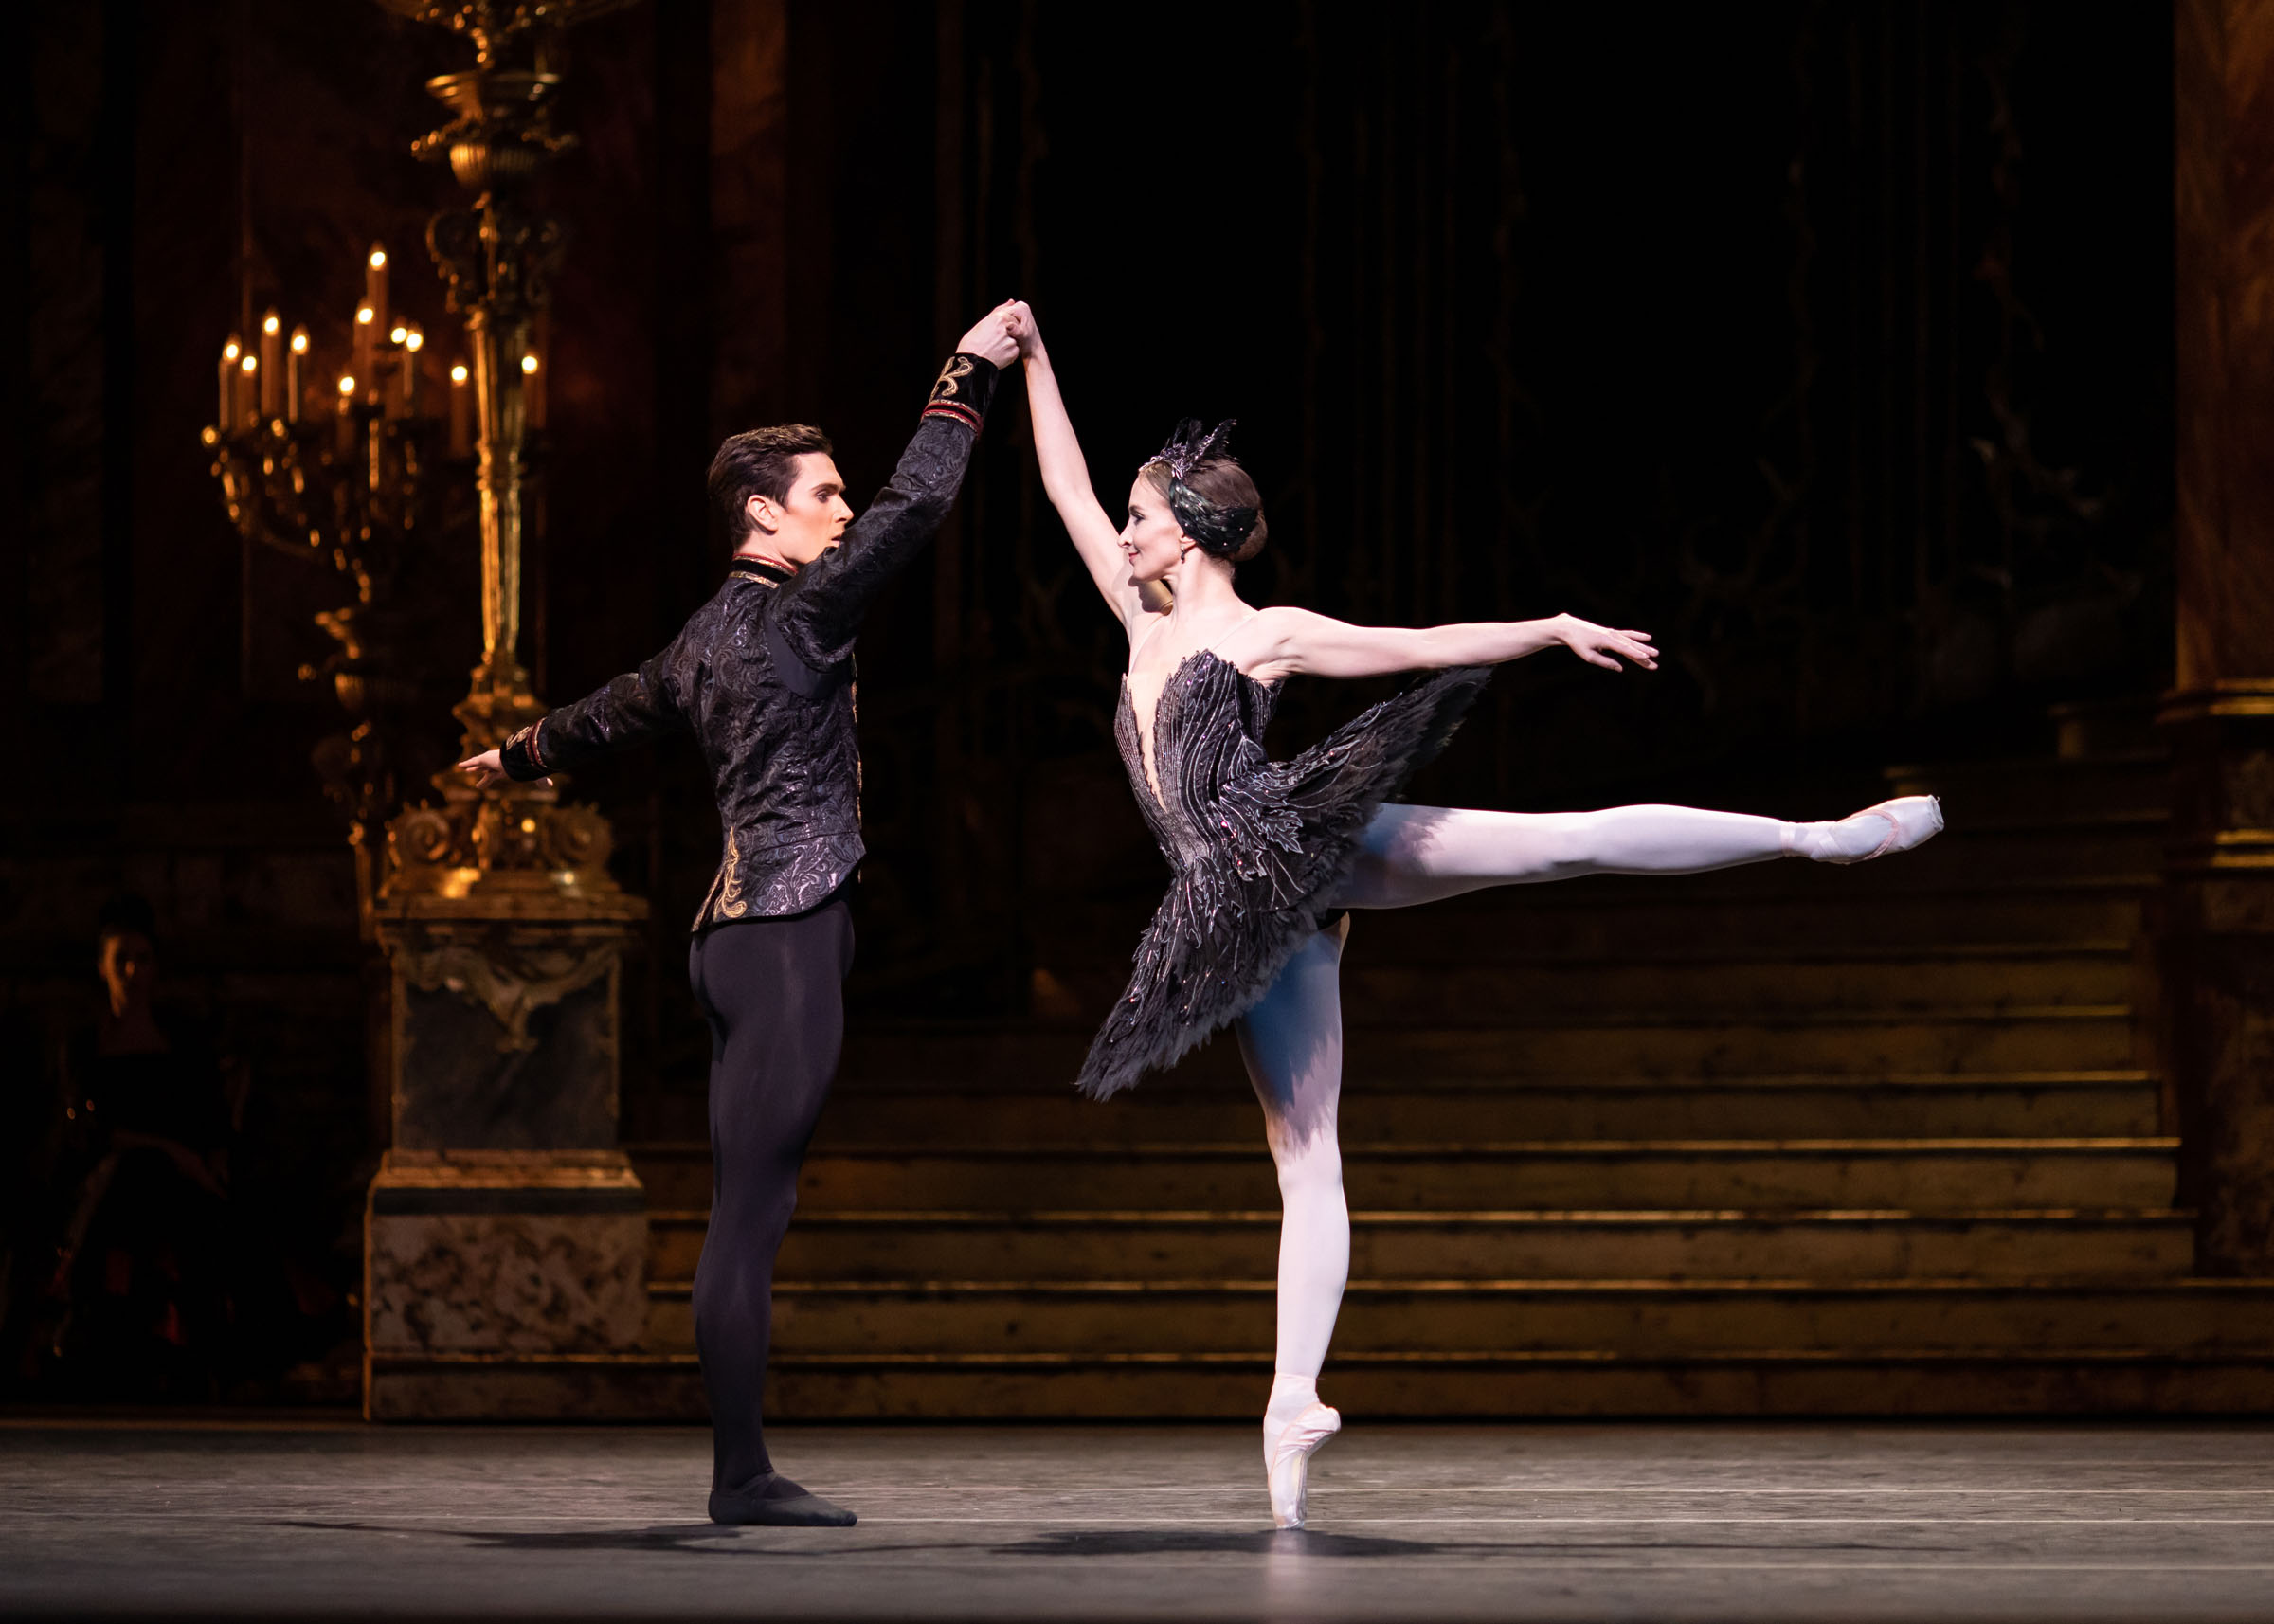 William Bracewell as Prince Siegfried and Lauren Cuthbertson as Odile in Swan Lake